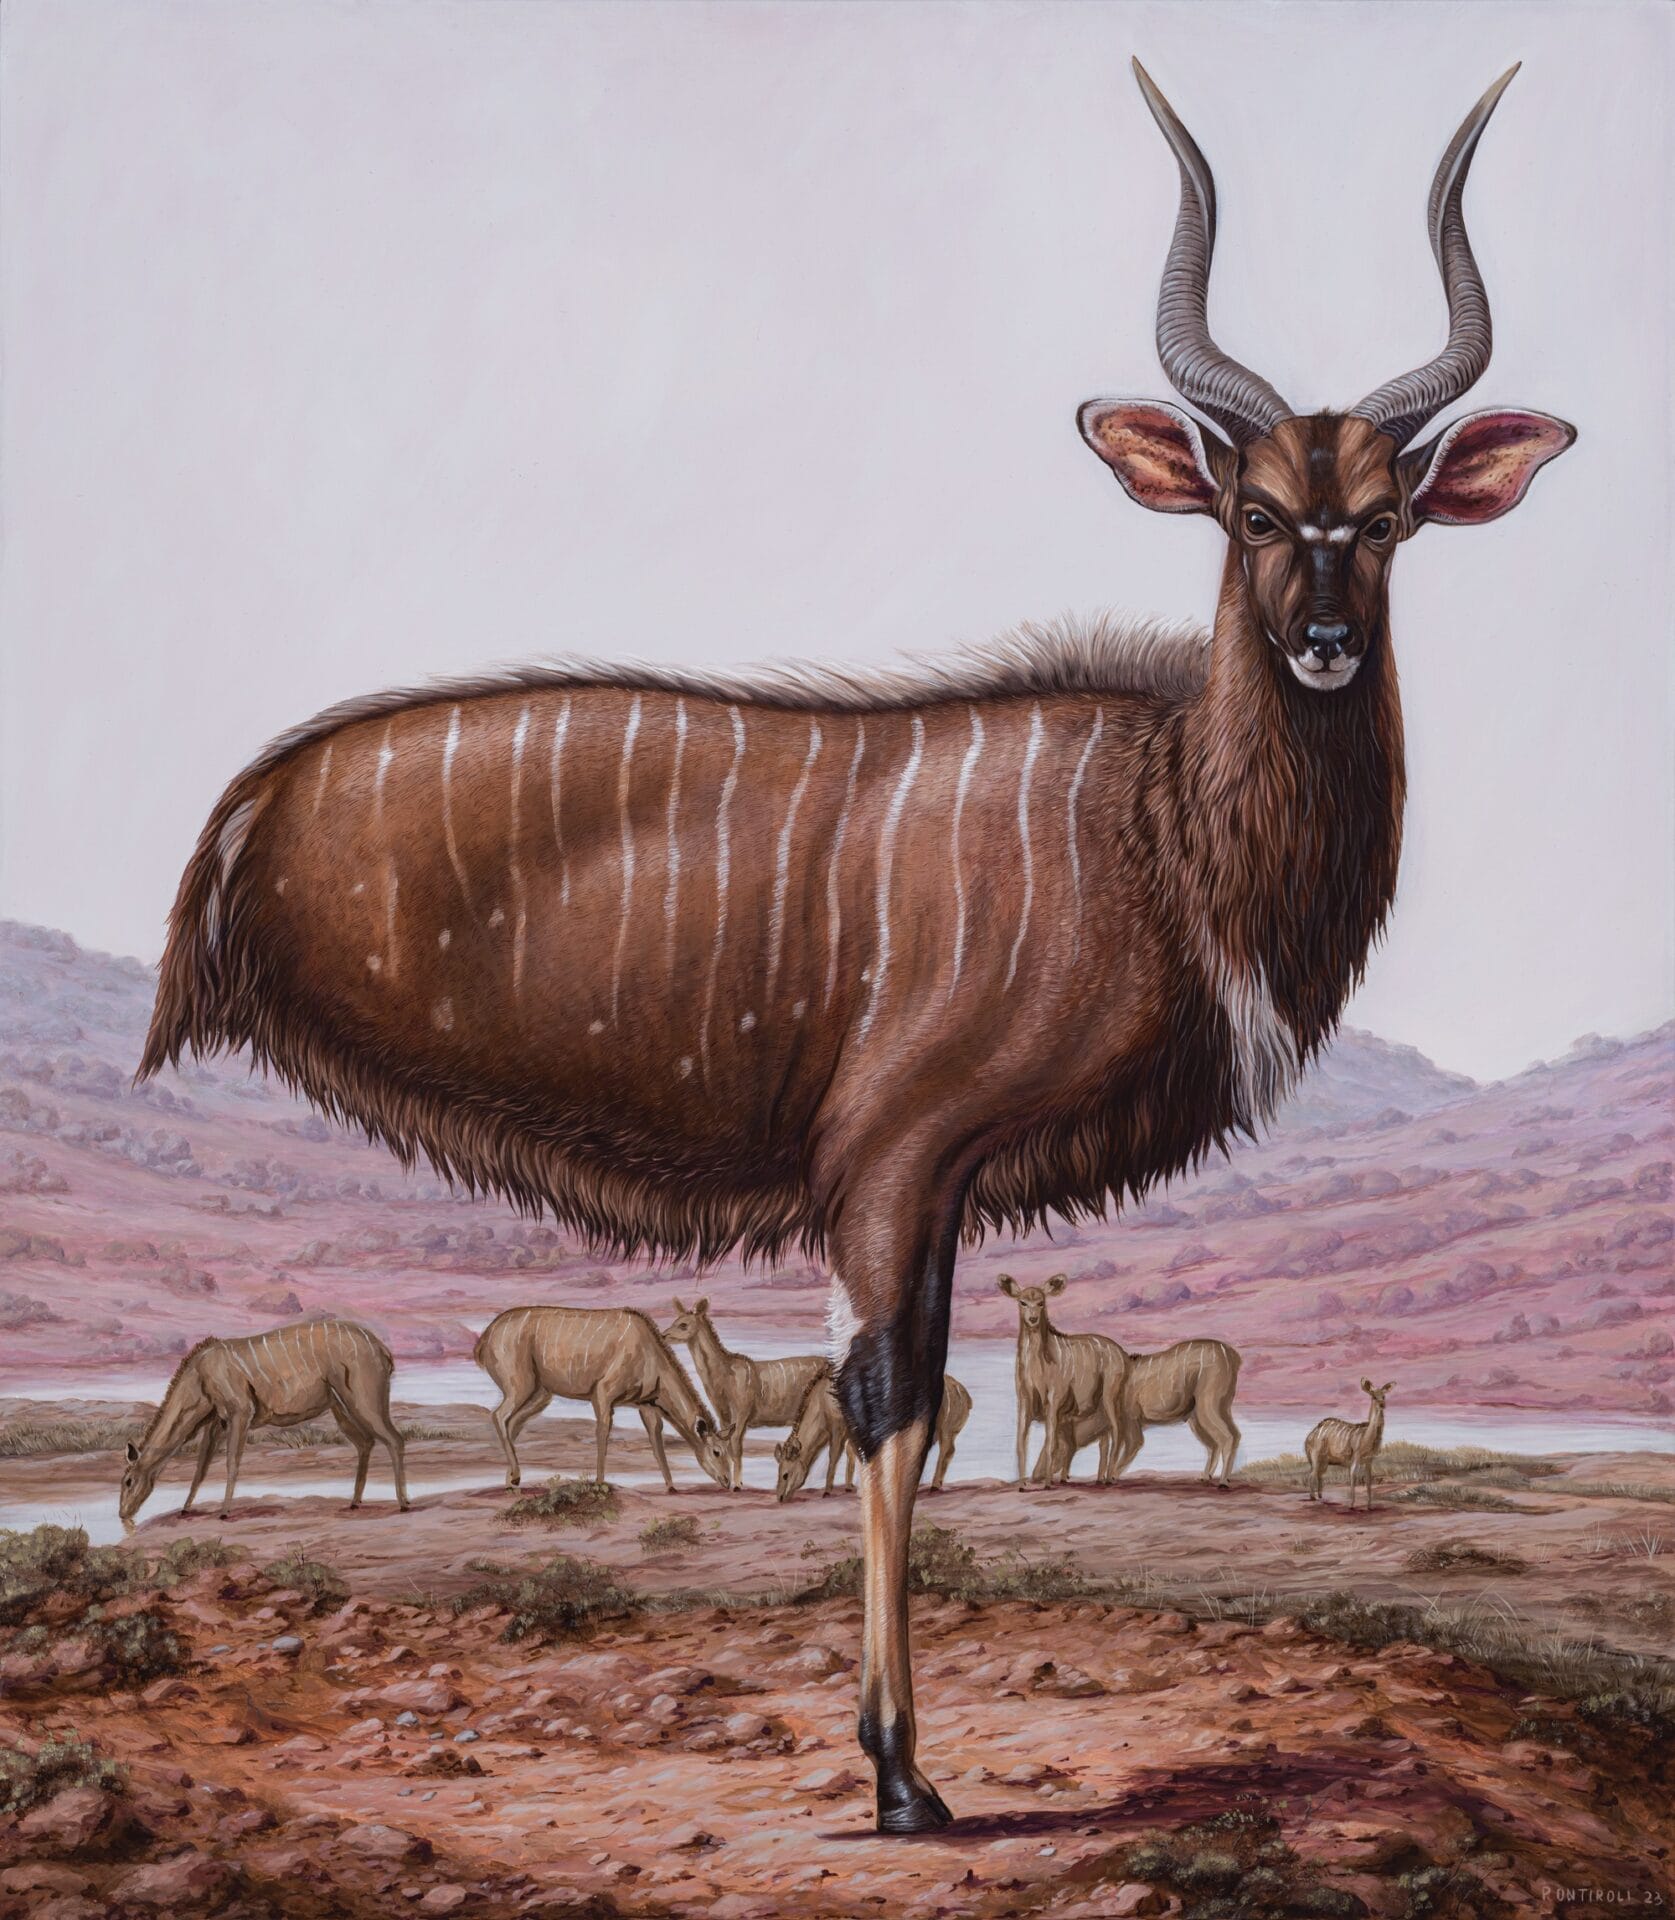 a painting of a gazelle standing on one leg in a dry climate